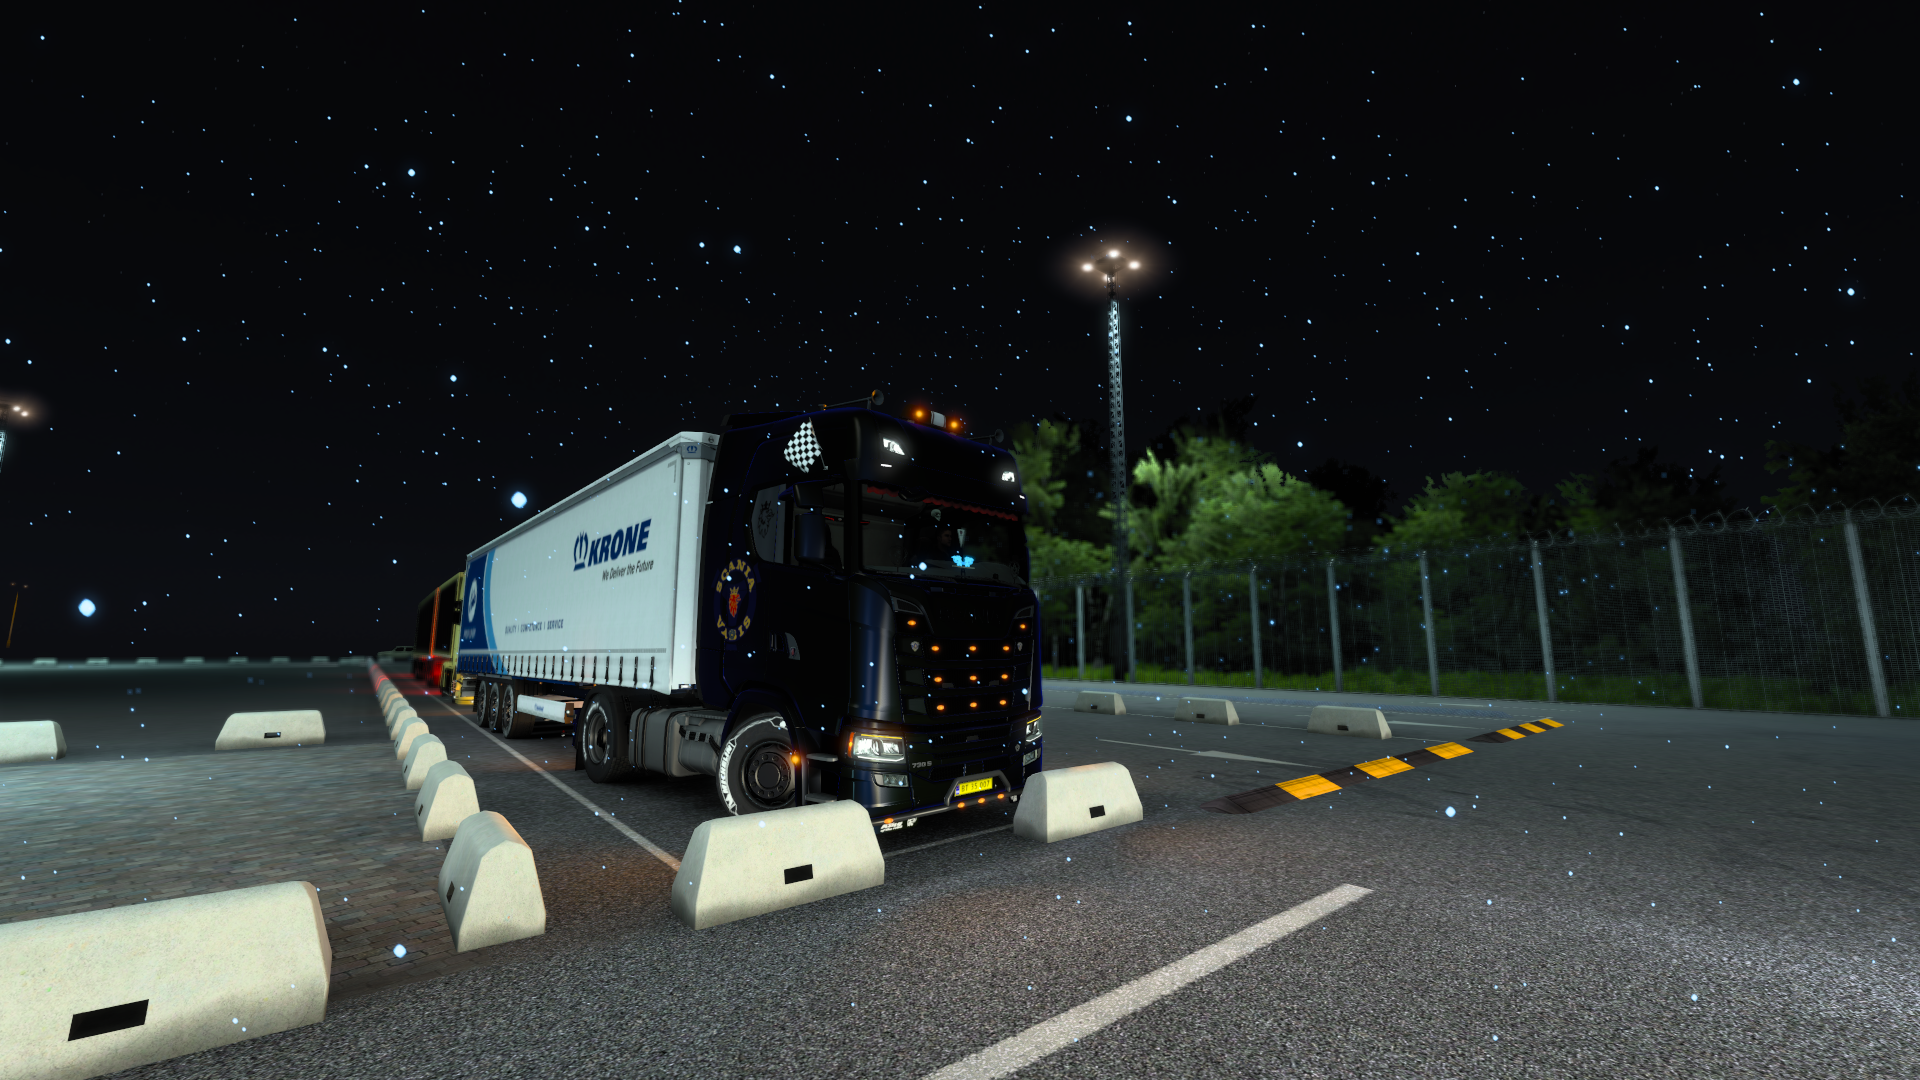 ets2_20220324_220025_00.png